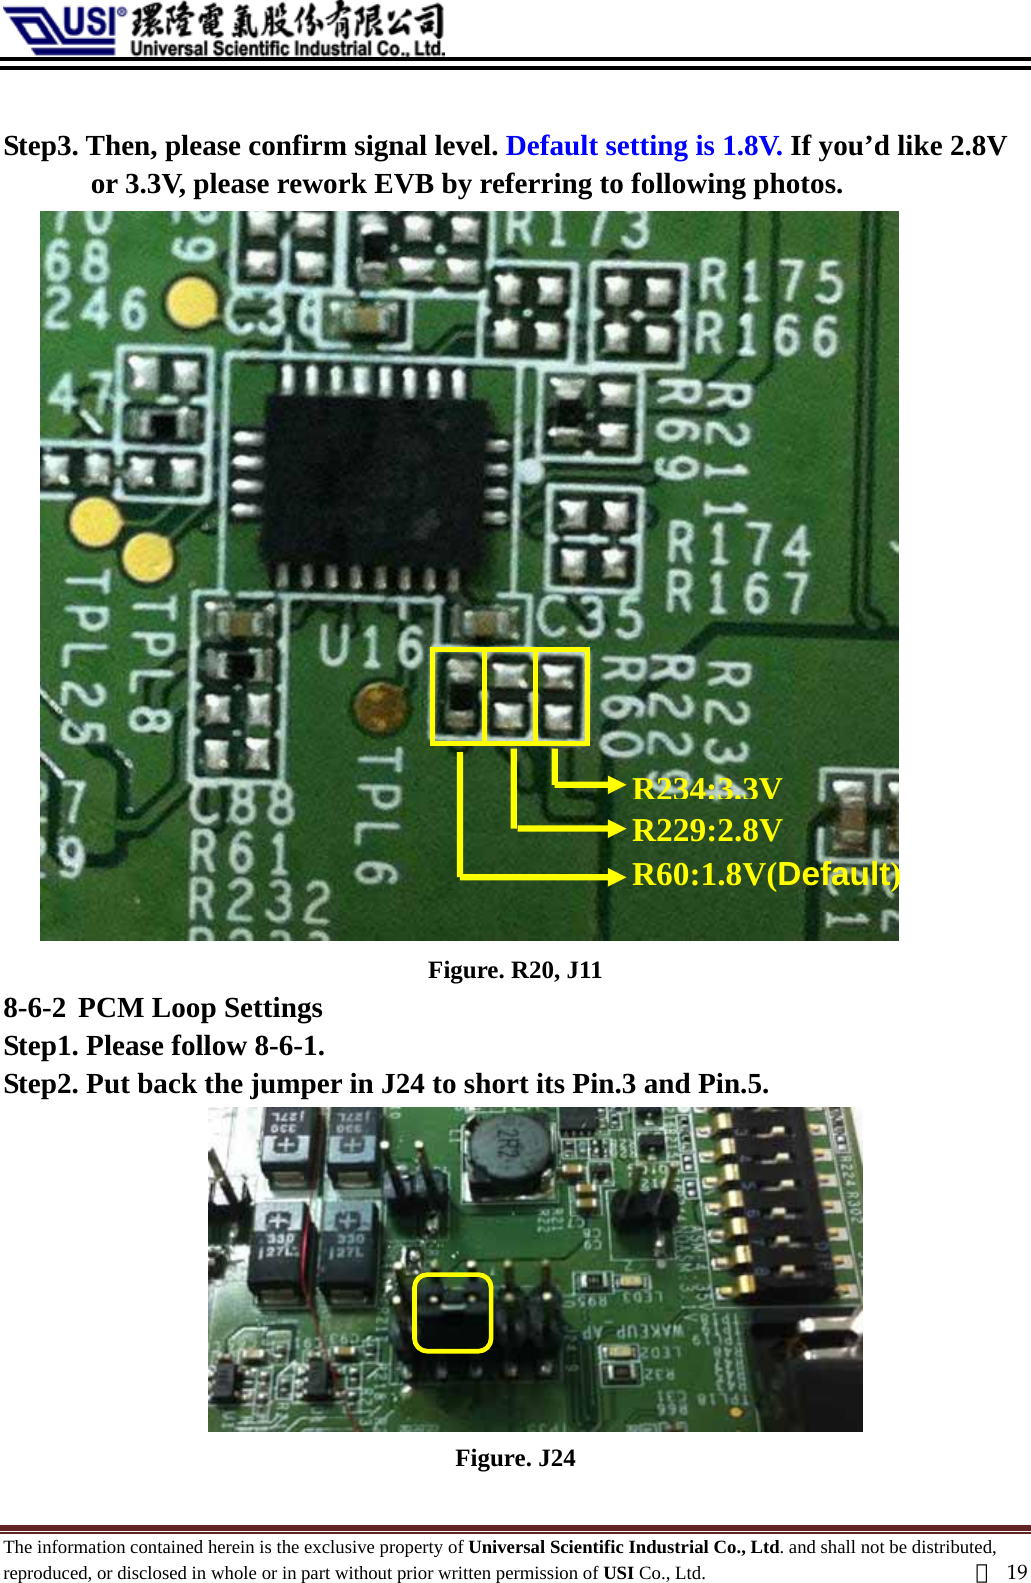   Step3. Then, please confirm signal level. Default setting is 1.8V. If you’d like 2.8V or 3.3V, please rework EVB by referring to following photos. R60:1.8V(Default) R229:2.8V R234:3.3V Figure. R20, J11 8-6-2 PCM Loop Settings Step1. Please follow 8-6-1. Step2. Put back the jumper in J24 to short its Pin.3 and Pin.5.  Figure. J24 The information contained herein is the exclusive property of Universal Scientific Industrial Co., Ltd. and shall not be distributed, reproduced, or disclosed in whole or in part without prior written permission of USI Co., Ltd.  頁19 